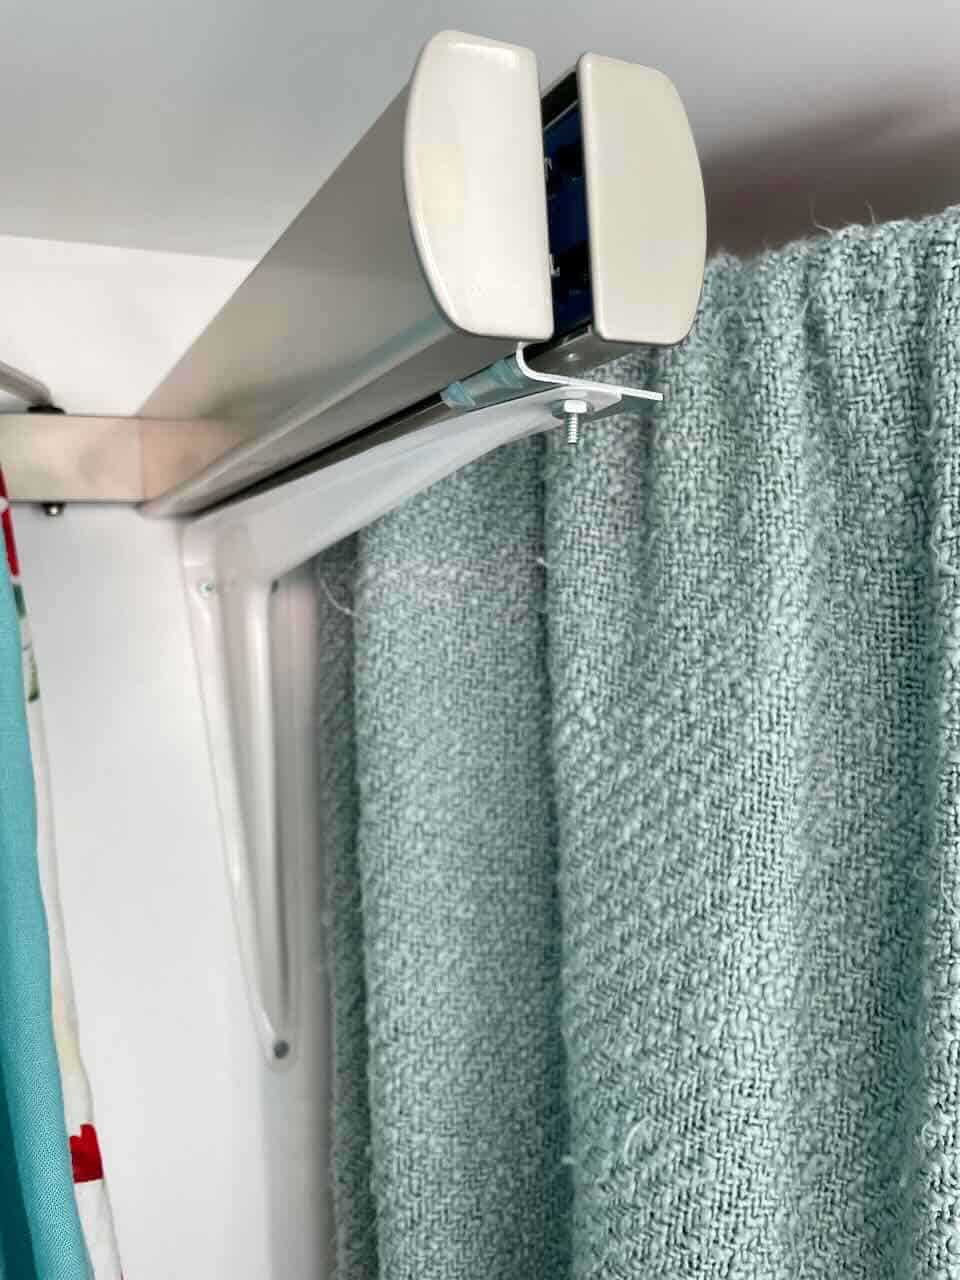 LaundryRoom  Drying Rack and Storage Solutions